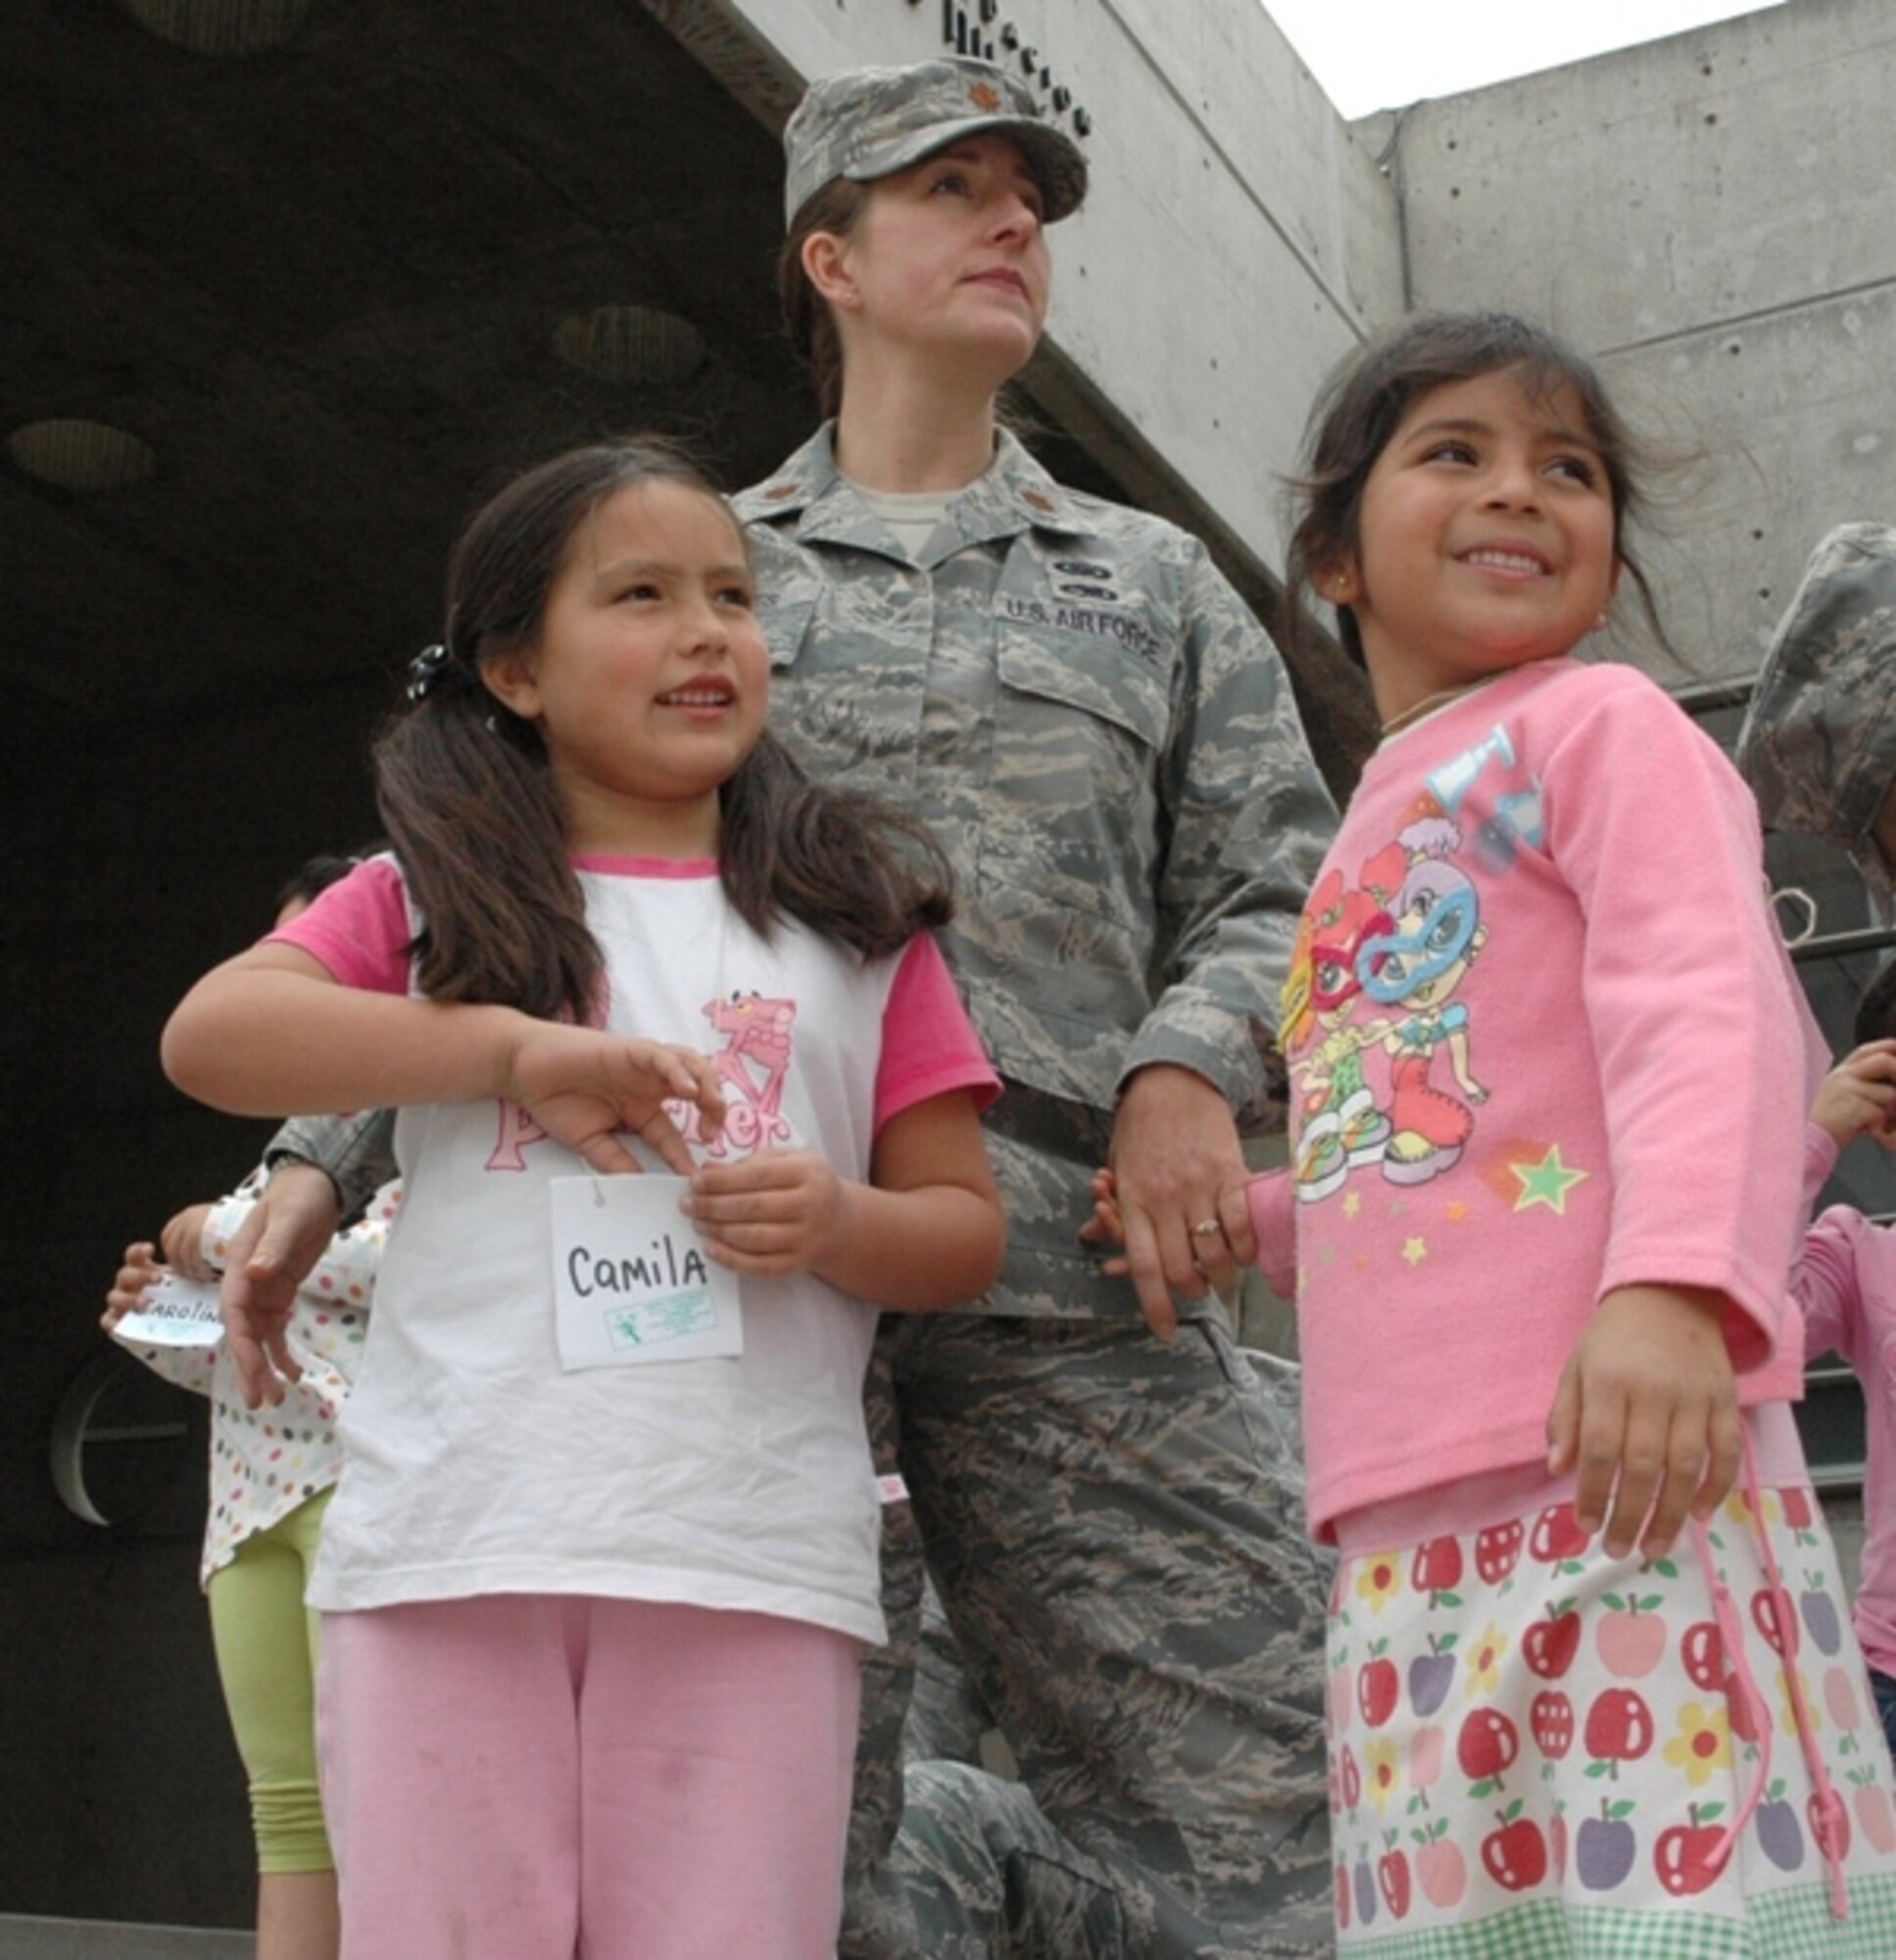 SANTIAGO, Chile -- Maj. Jana Nyerges, a member of Air Forces Southern participating in a subject matter exchange with the Chilean Air Force in Santiago, Chile, waits with children from the Centro Comunitario Angels, or 'Angels Community Center,' outside the Museo Interactivo Mirador prior to sponsoring the children's admission to the science exhibits.  Airmen decided to use their first day in Chile to sponsor a group of at-risk children during a visit to the museum. (Courtesy photo)